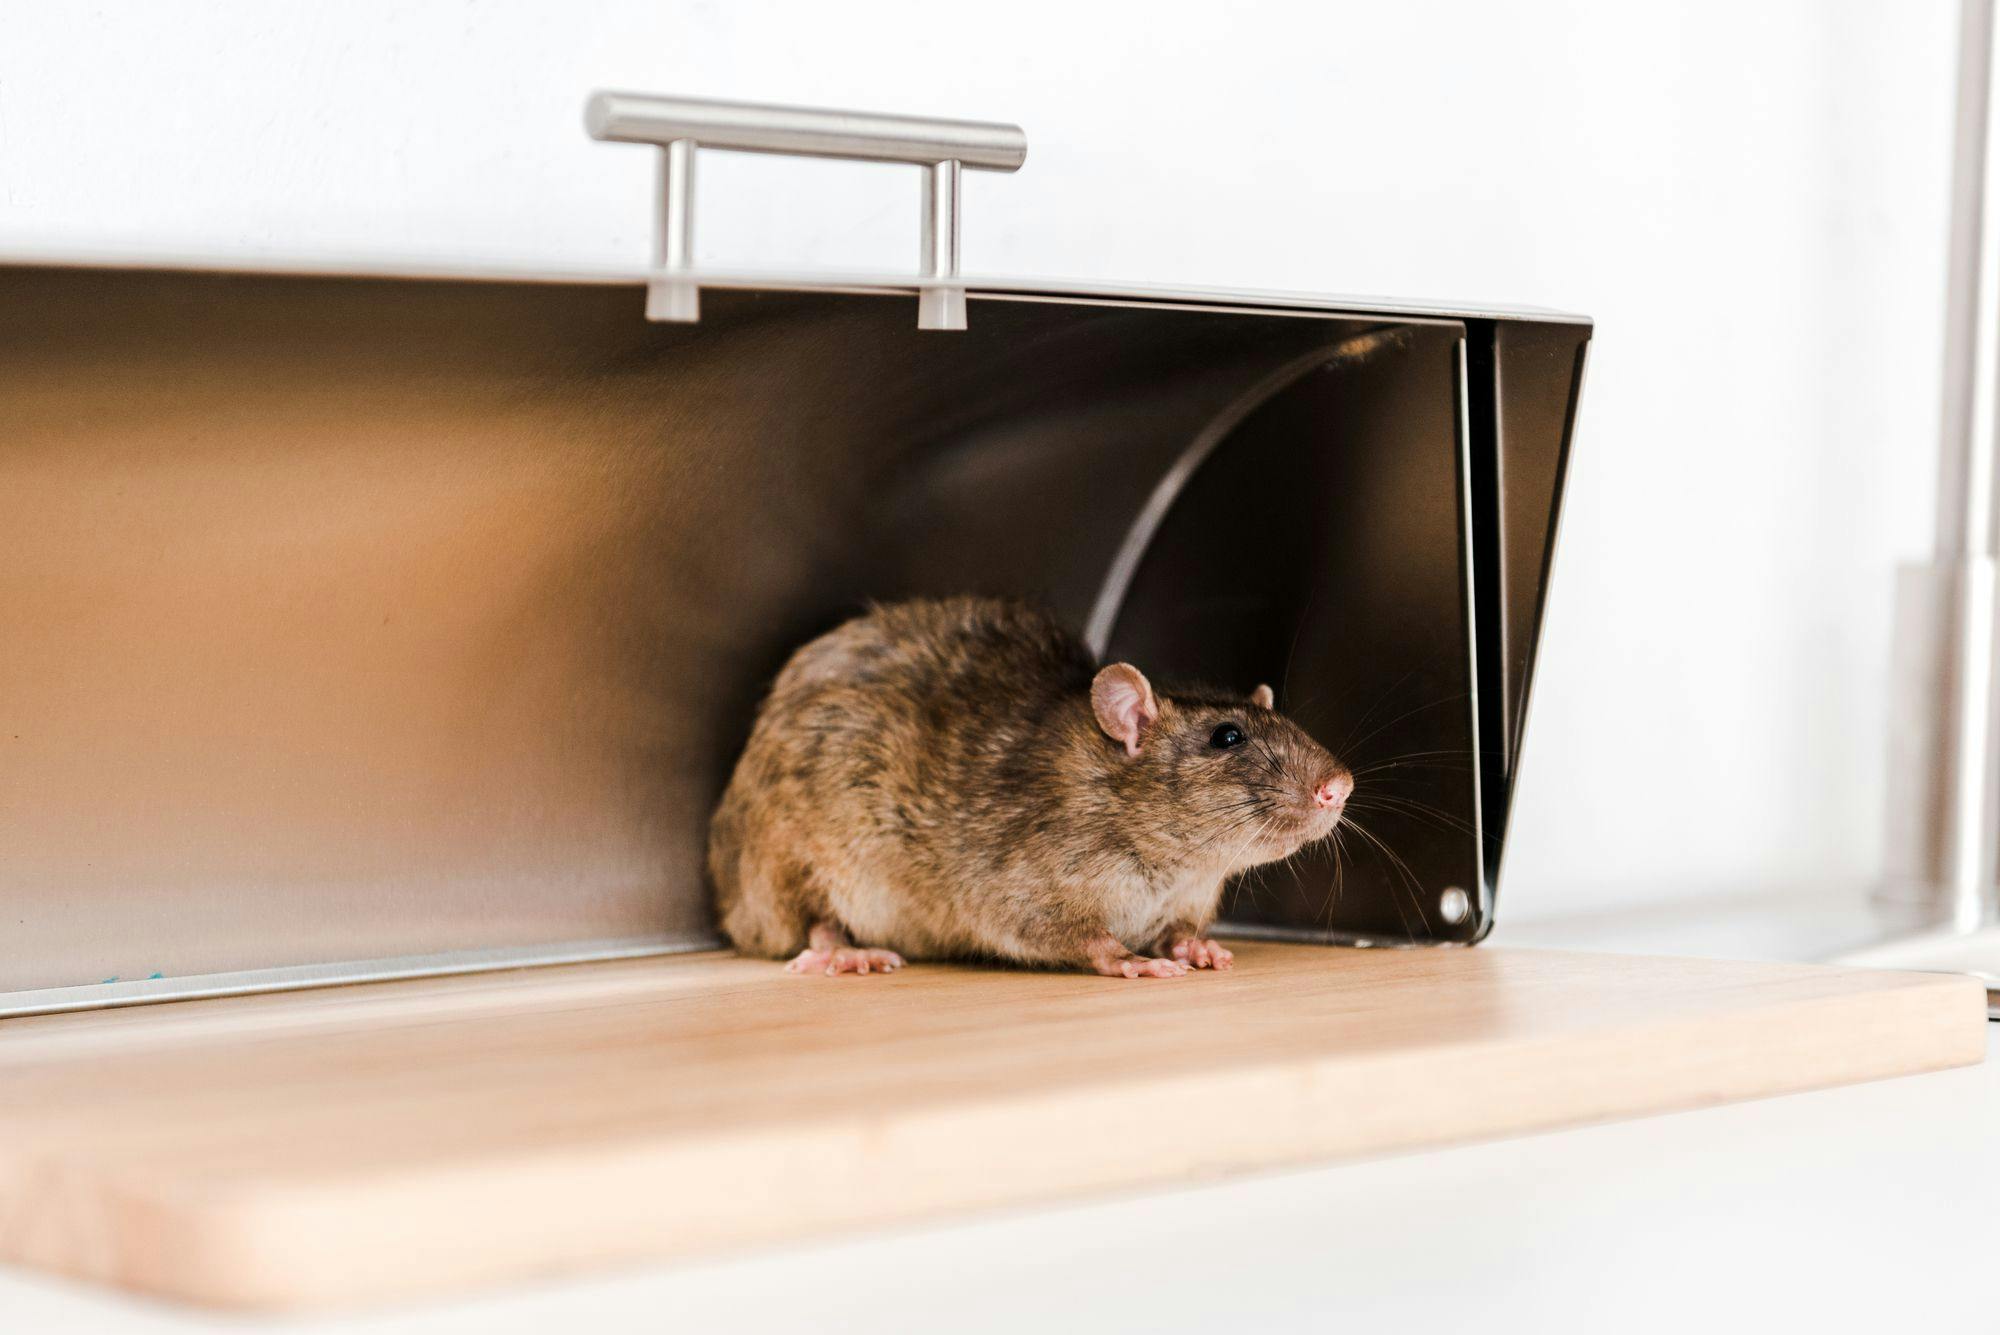 Uncover the essentials of rodent prevention through sanitation. From food storage to decluttering, learn how cleanliness keeps your home rodent-free.